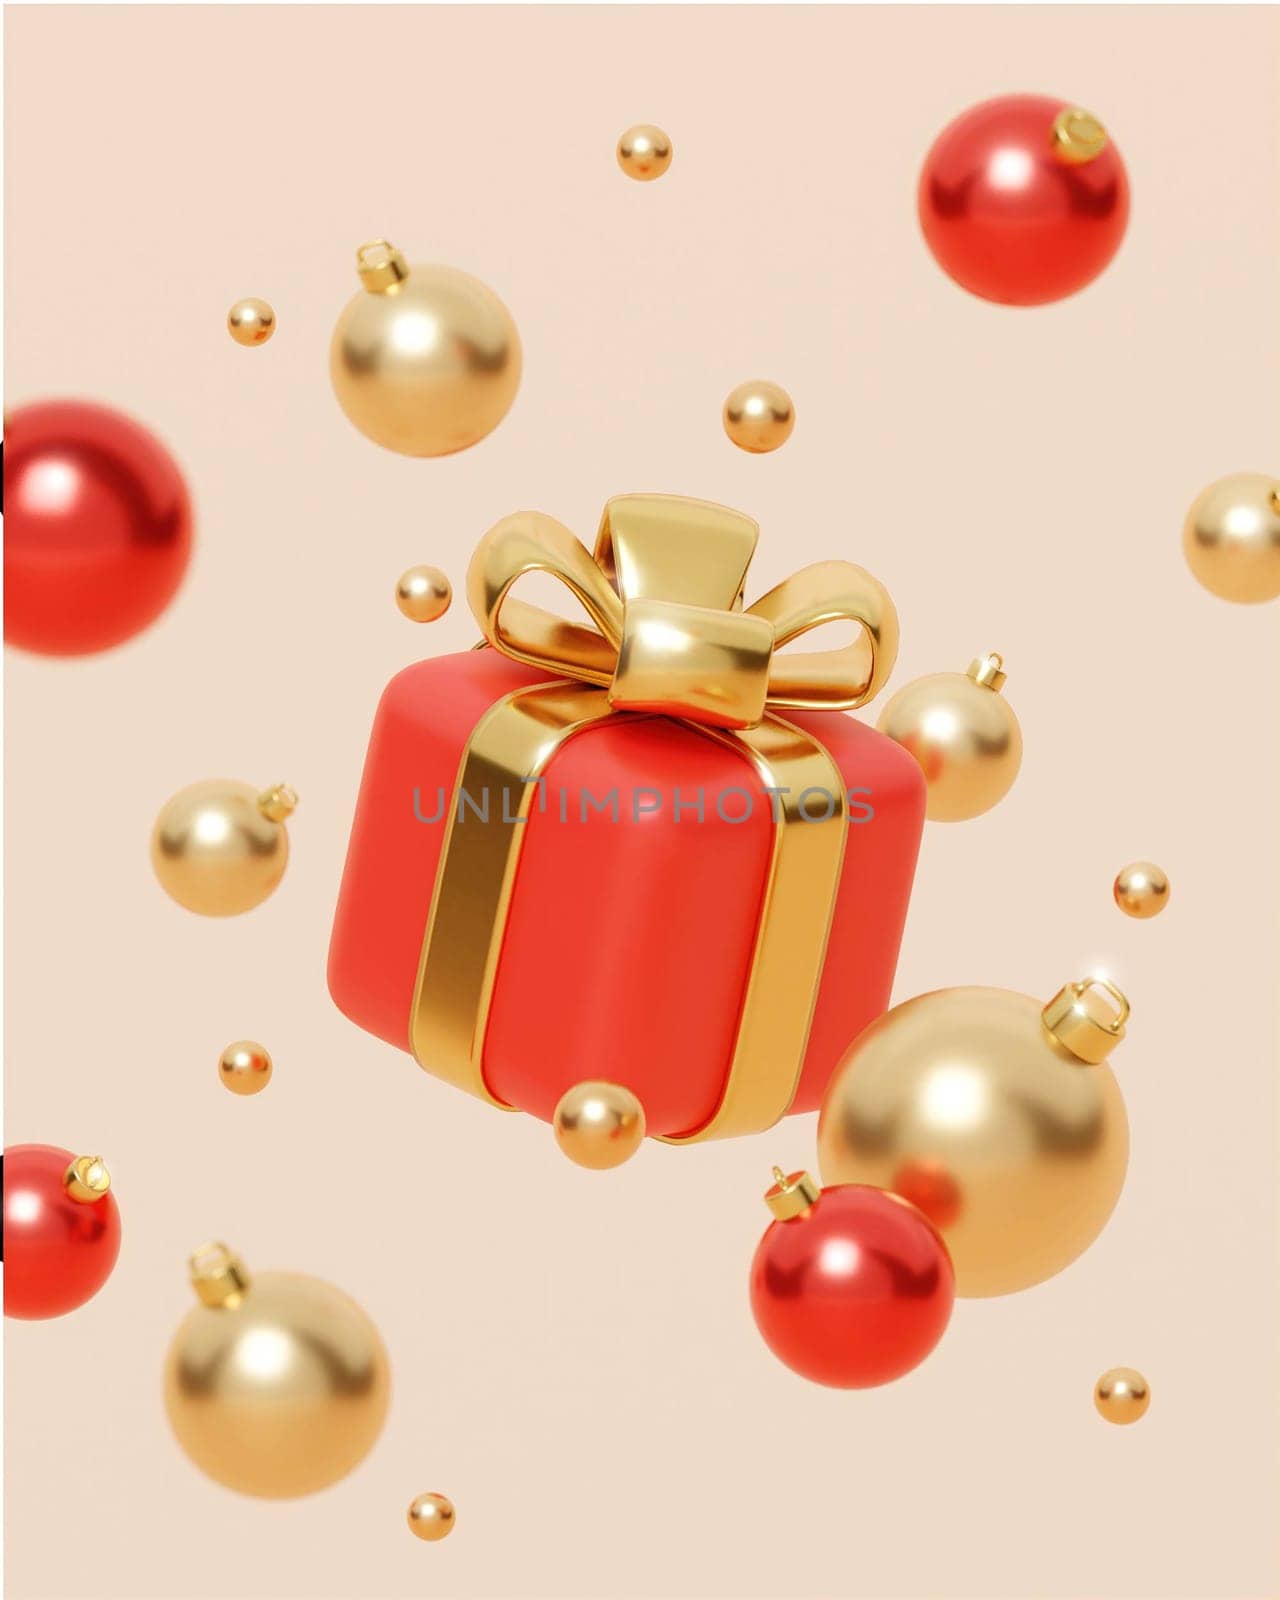 Merry Christmas and Happy New Year. Xmas Background design, gift box, gold Christmas tree, white balls and glitter gold confetti. Christmas poster, holiday banner layout. 3d render.